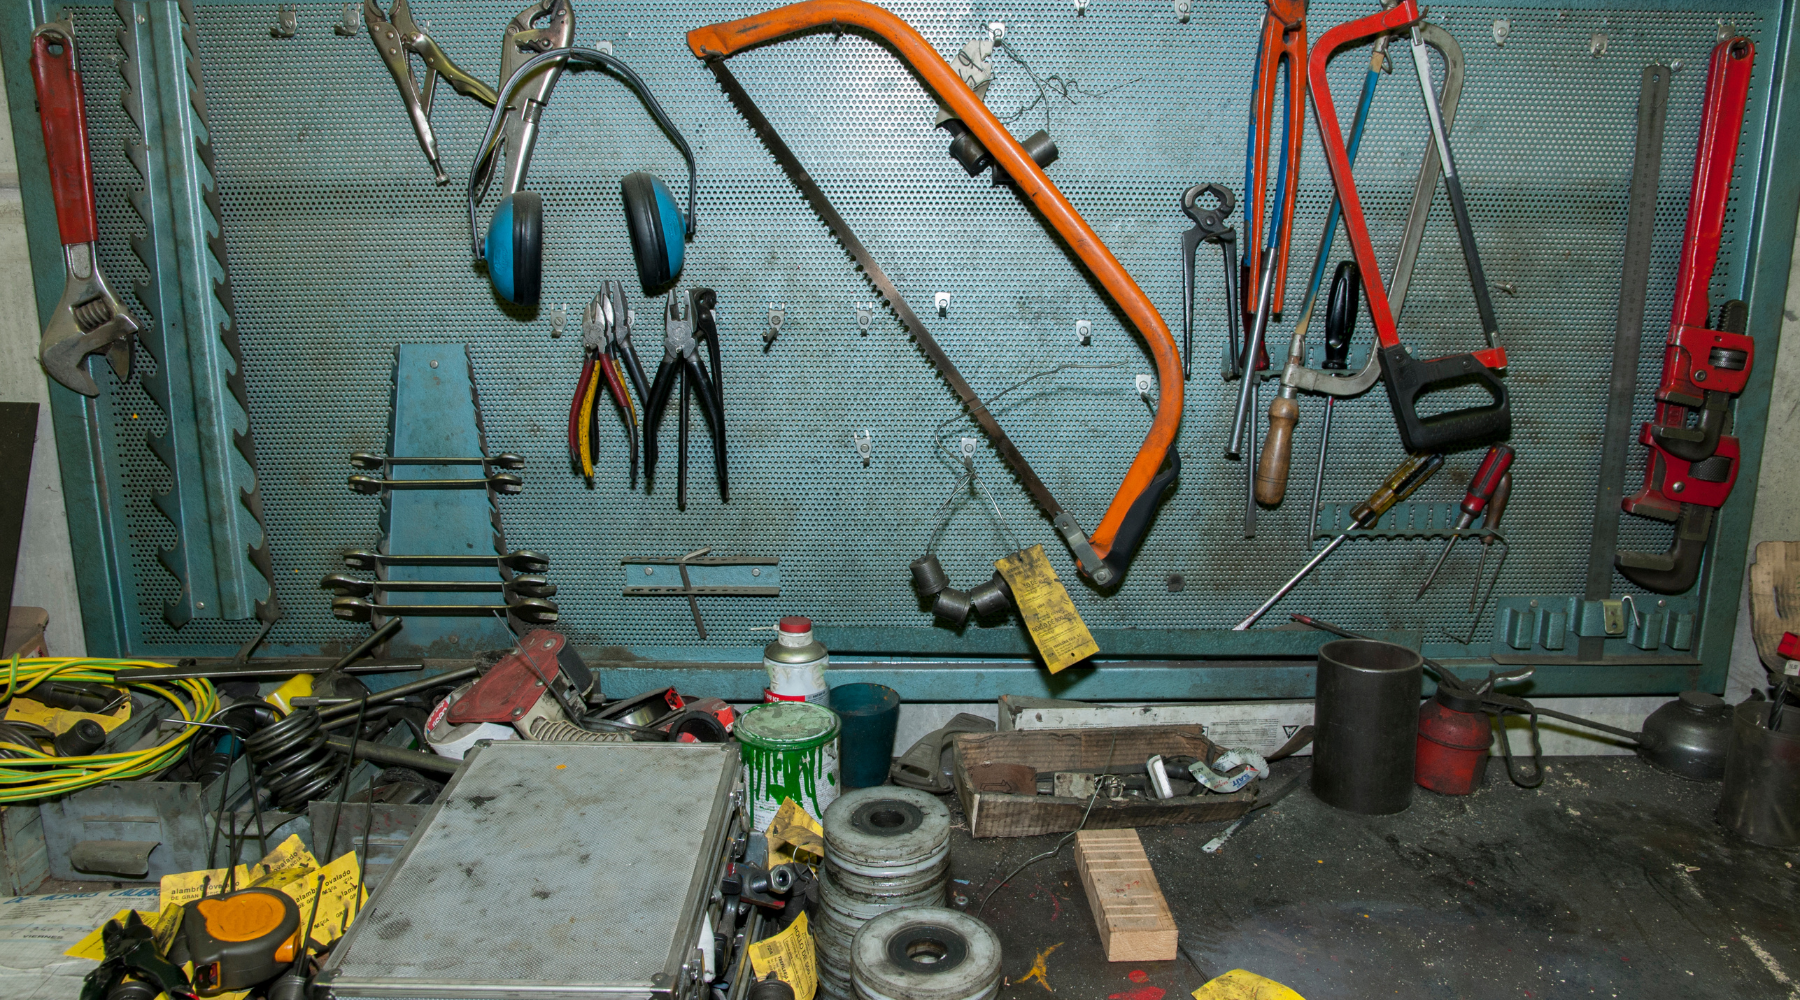 work bench with tools